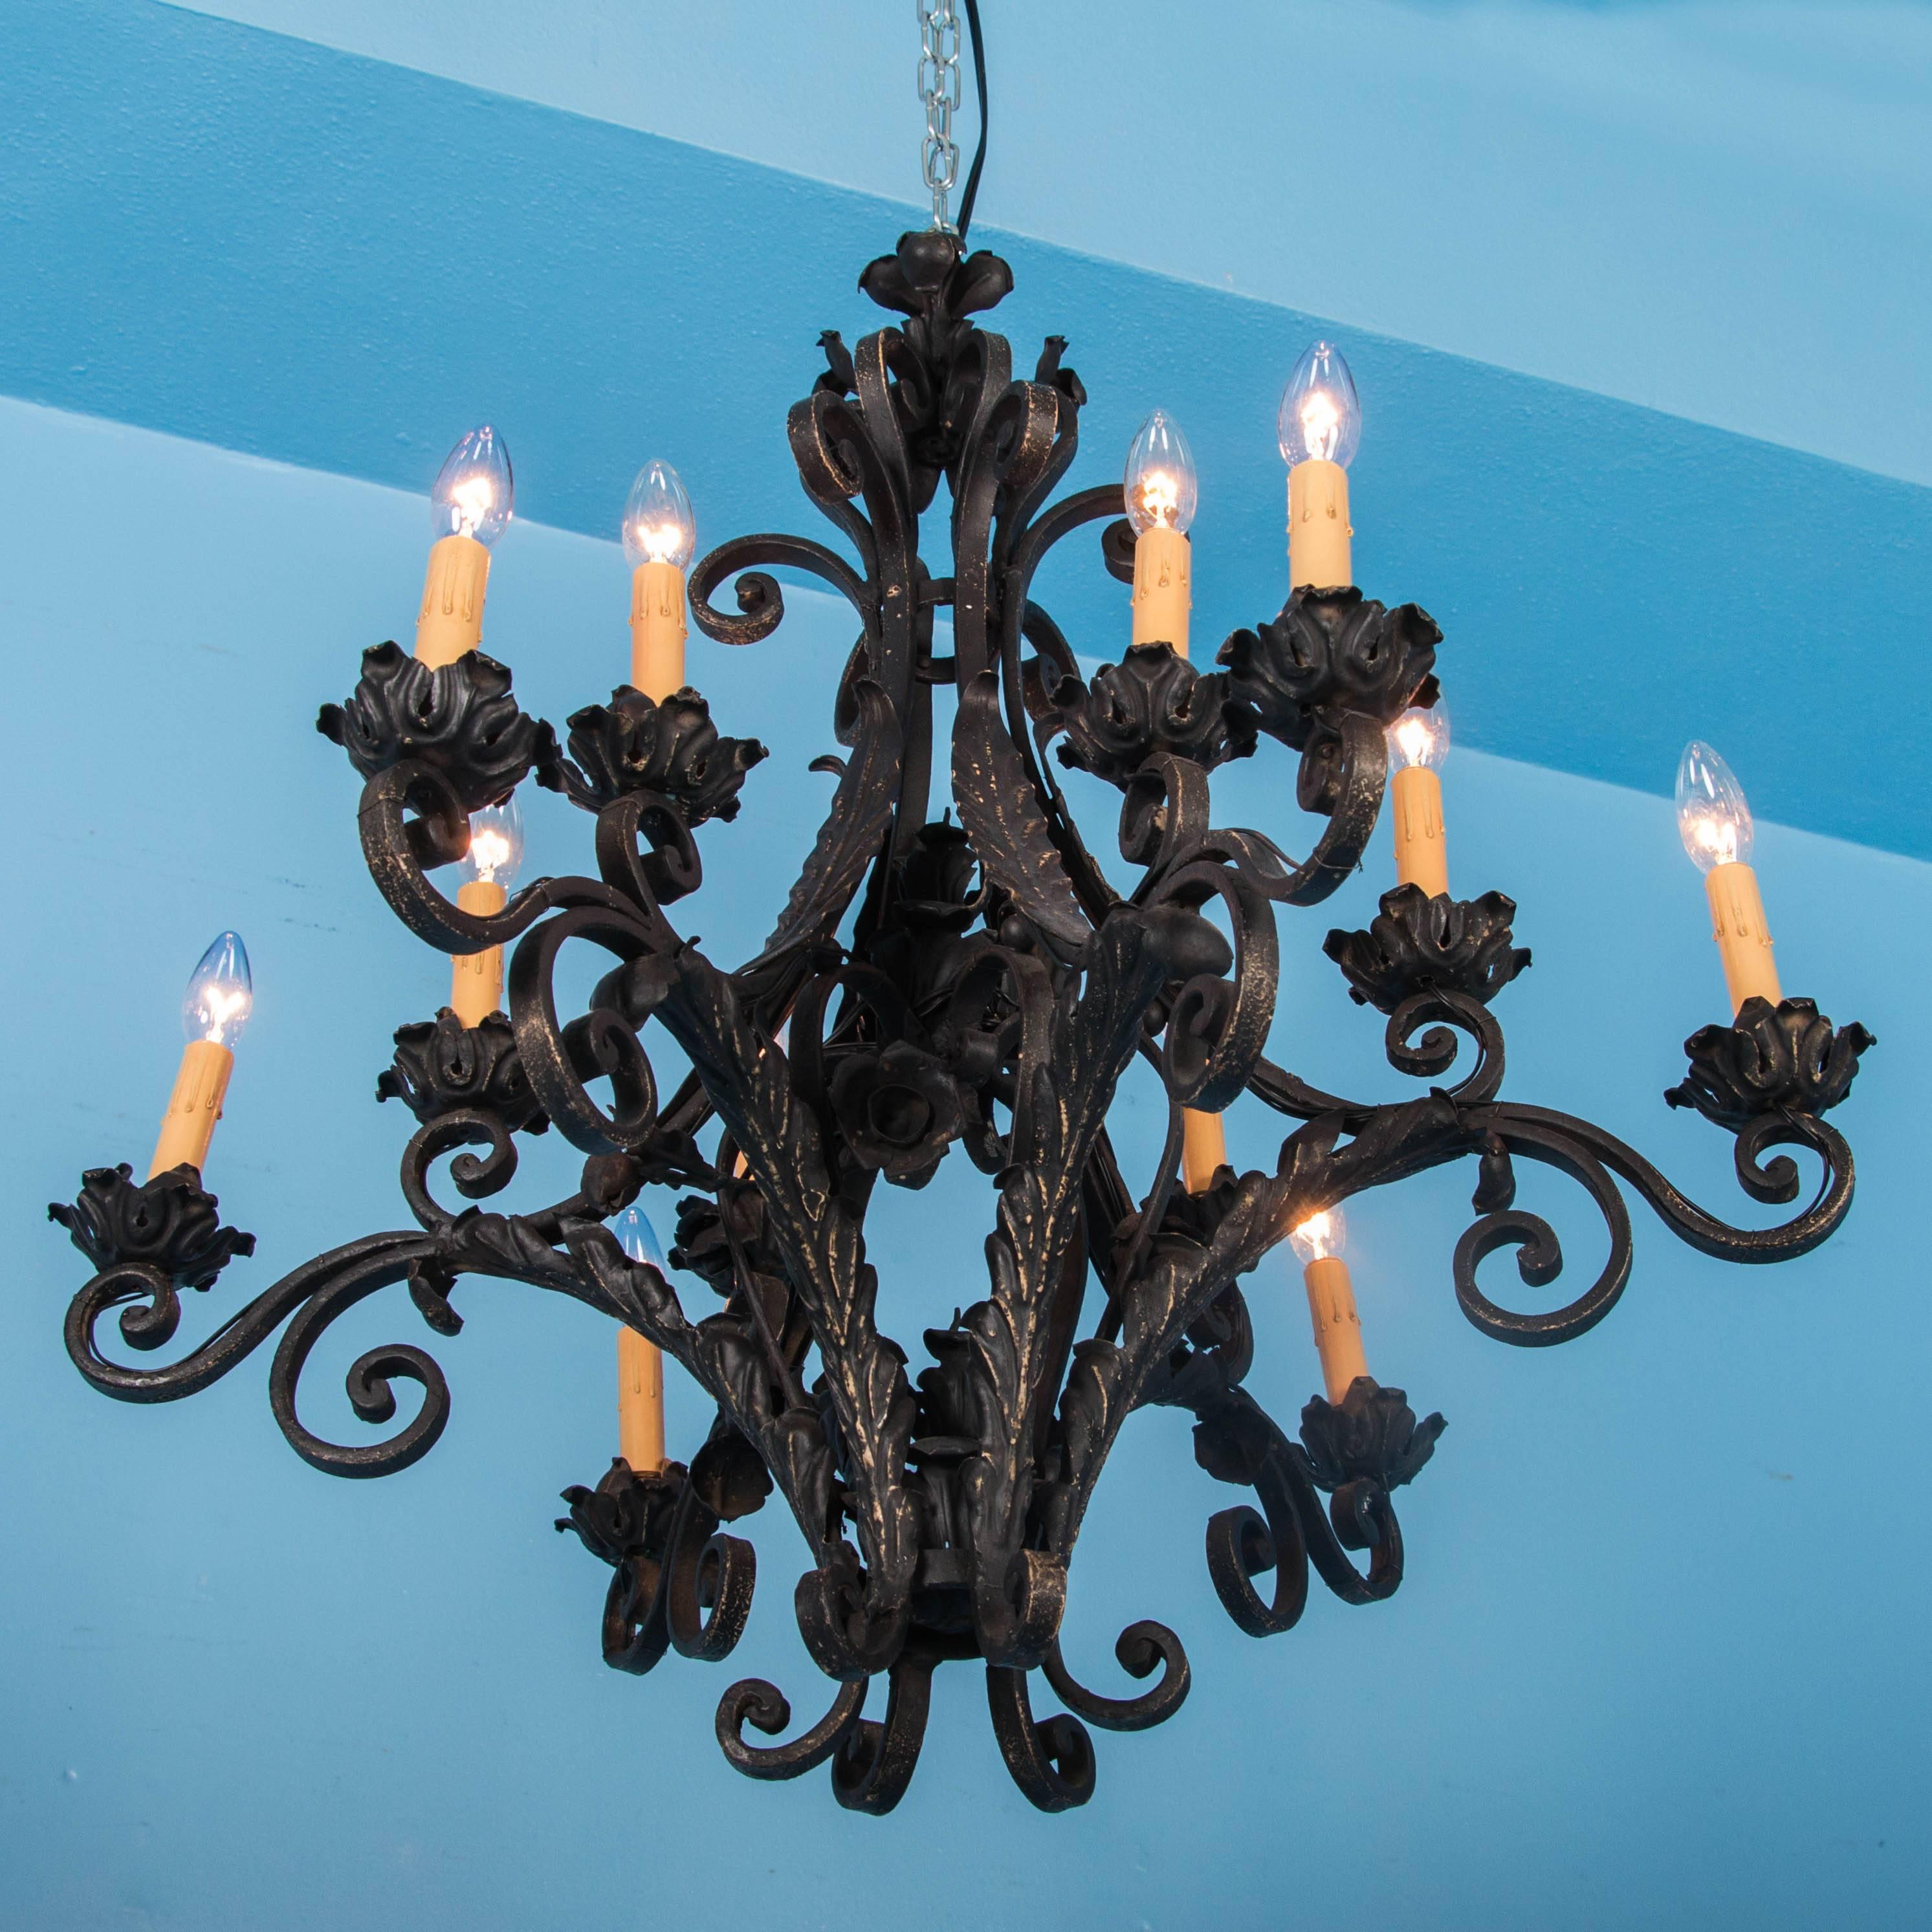 This antique French wrought iron chandelier, circa 1920, has six arms that radiate out from the centre. Each arm is set with a pair of lights, all with a candle cover and resting on a floral drip pan. With scrolled arms and applied leaf details, the